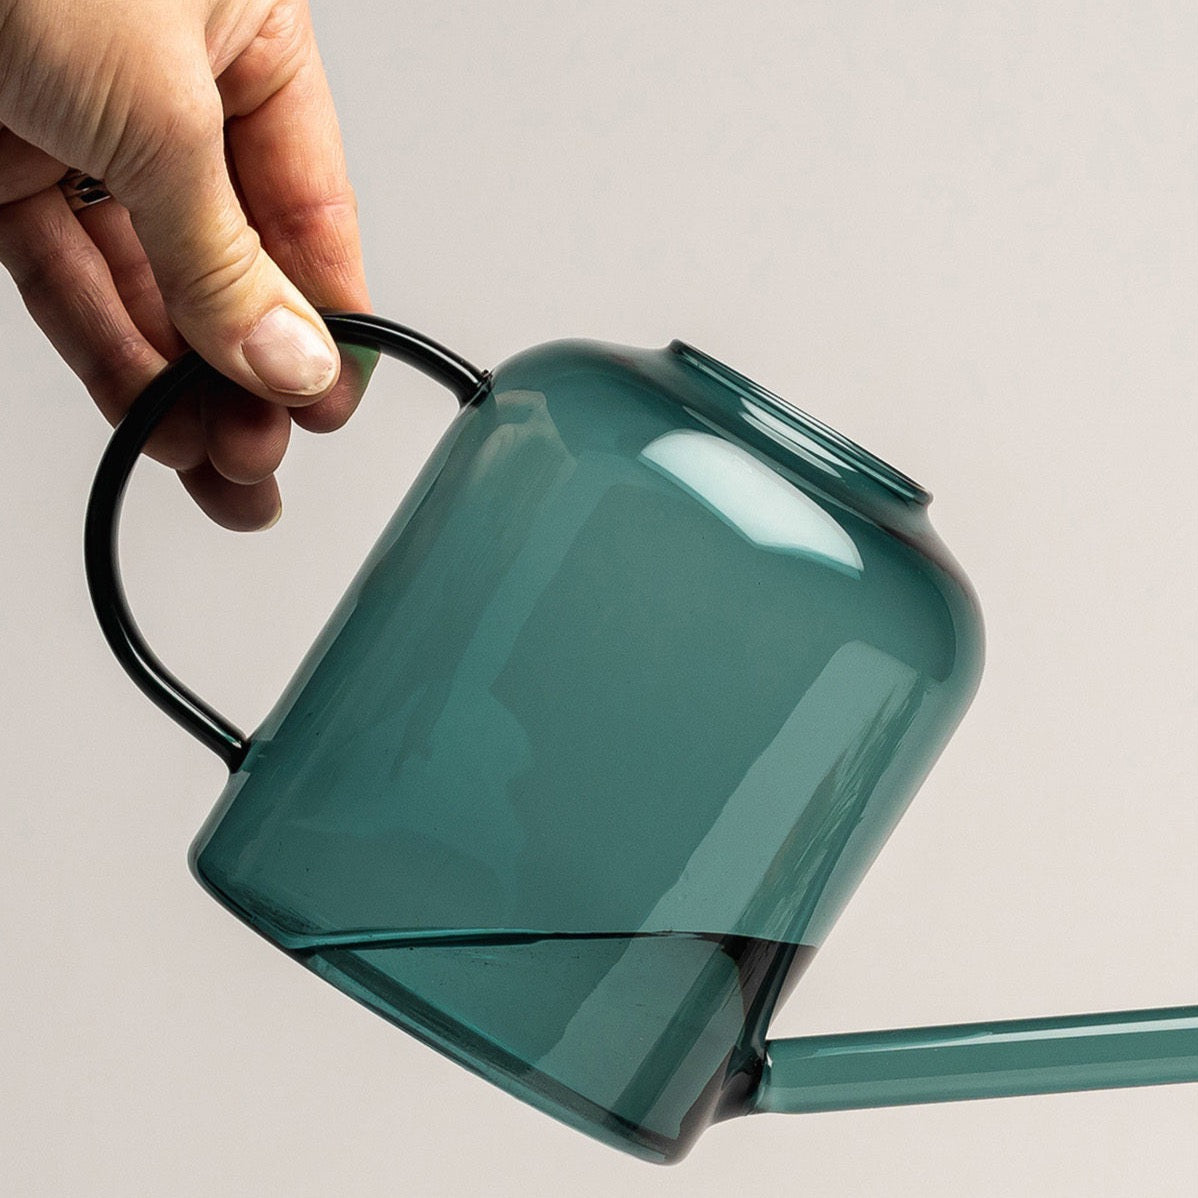 Teal Glass Muurla Design Watering Can 0.8L